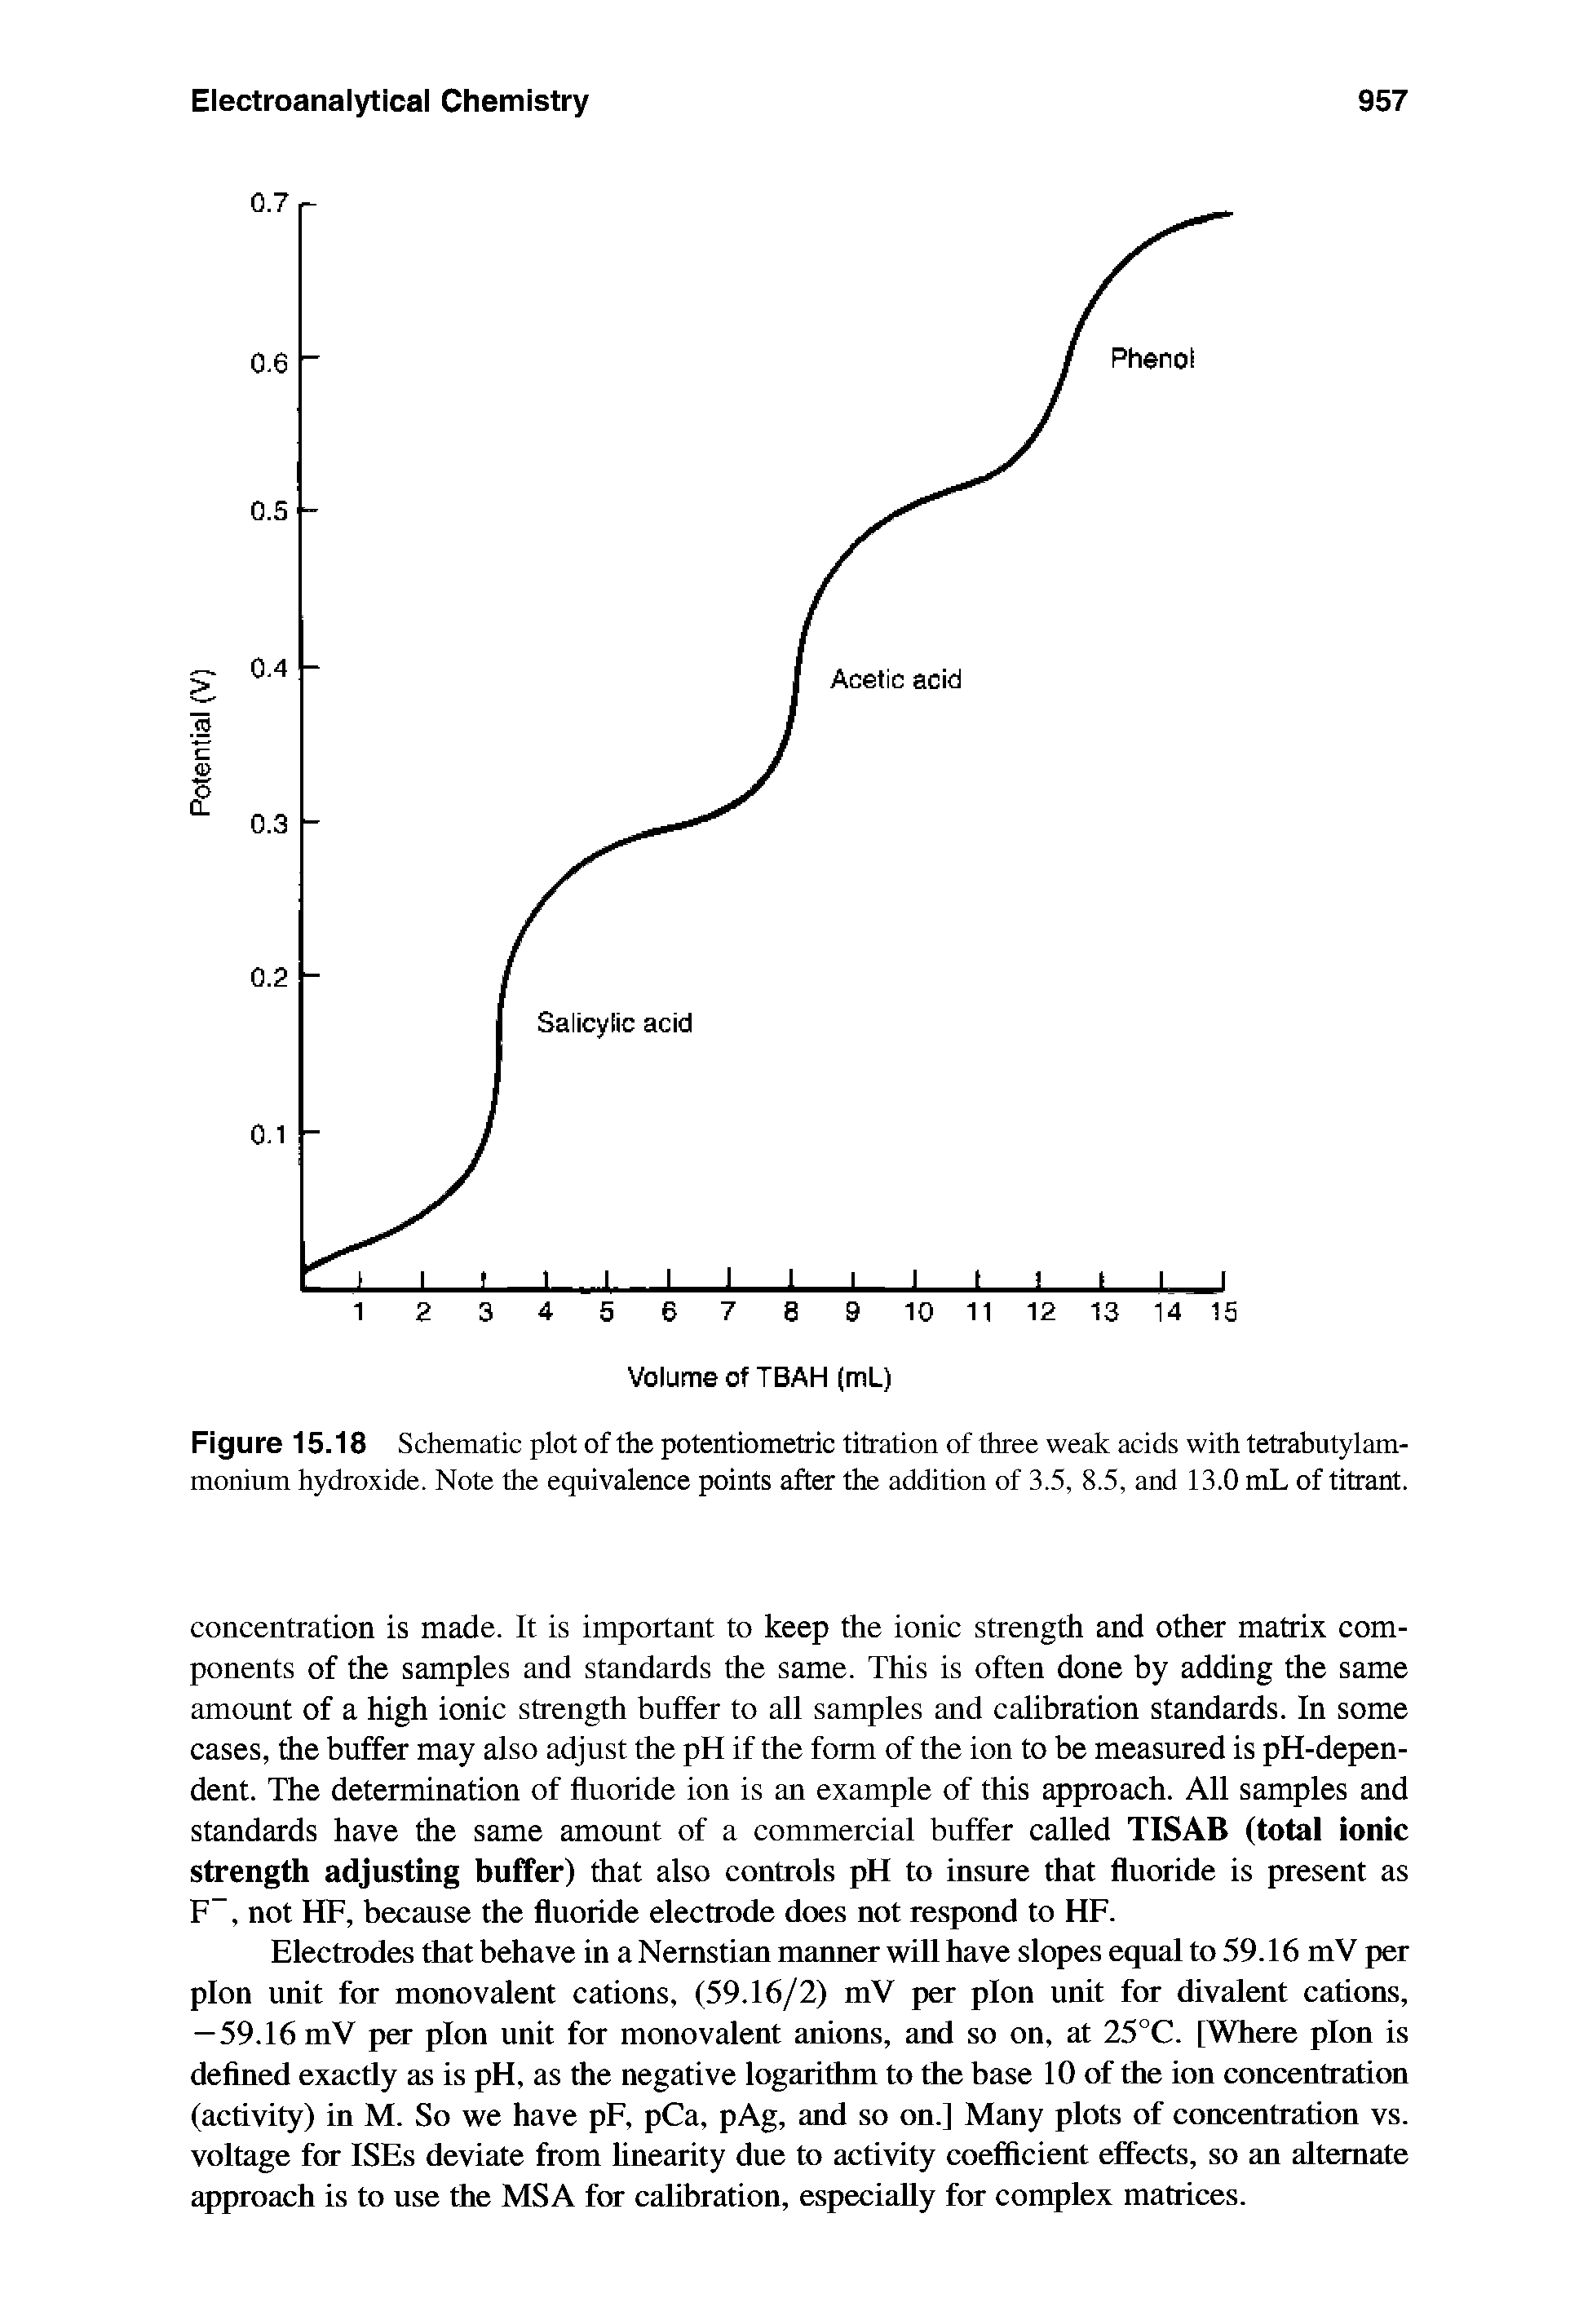 Figure 15.18 Schematic plot of the potentiometric titration of three weak acids with tetrabutylam-monium hydroxide. Note the equivalence points after the addition of 3.5, 8.5, and 13.0 mL of titrant.